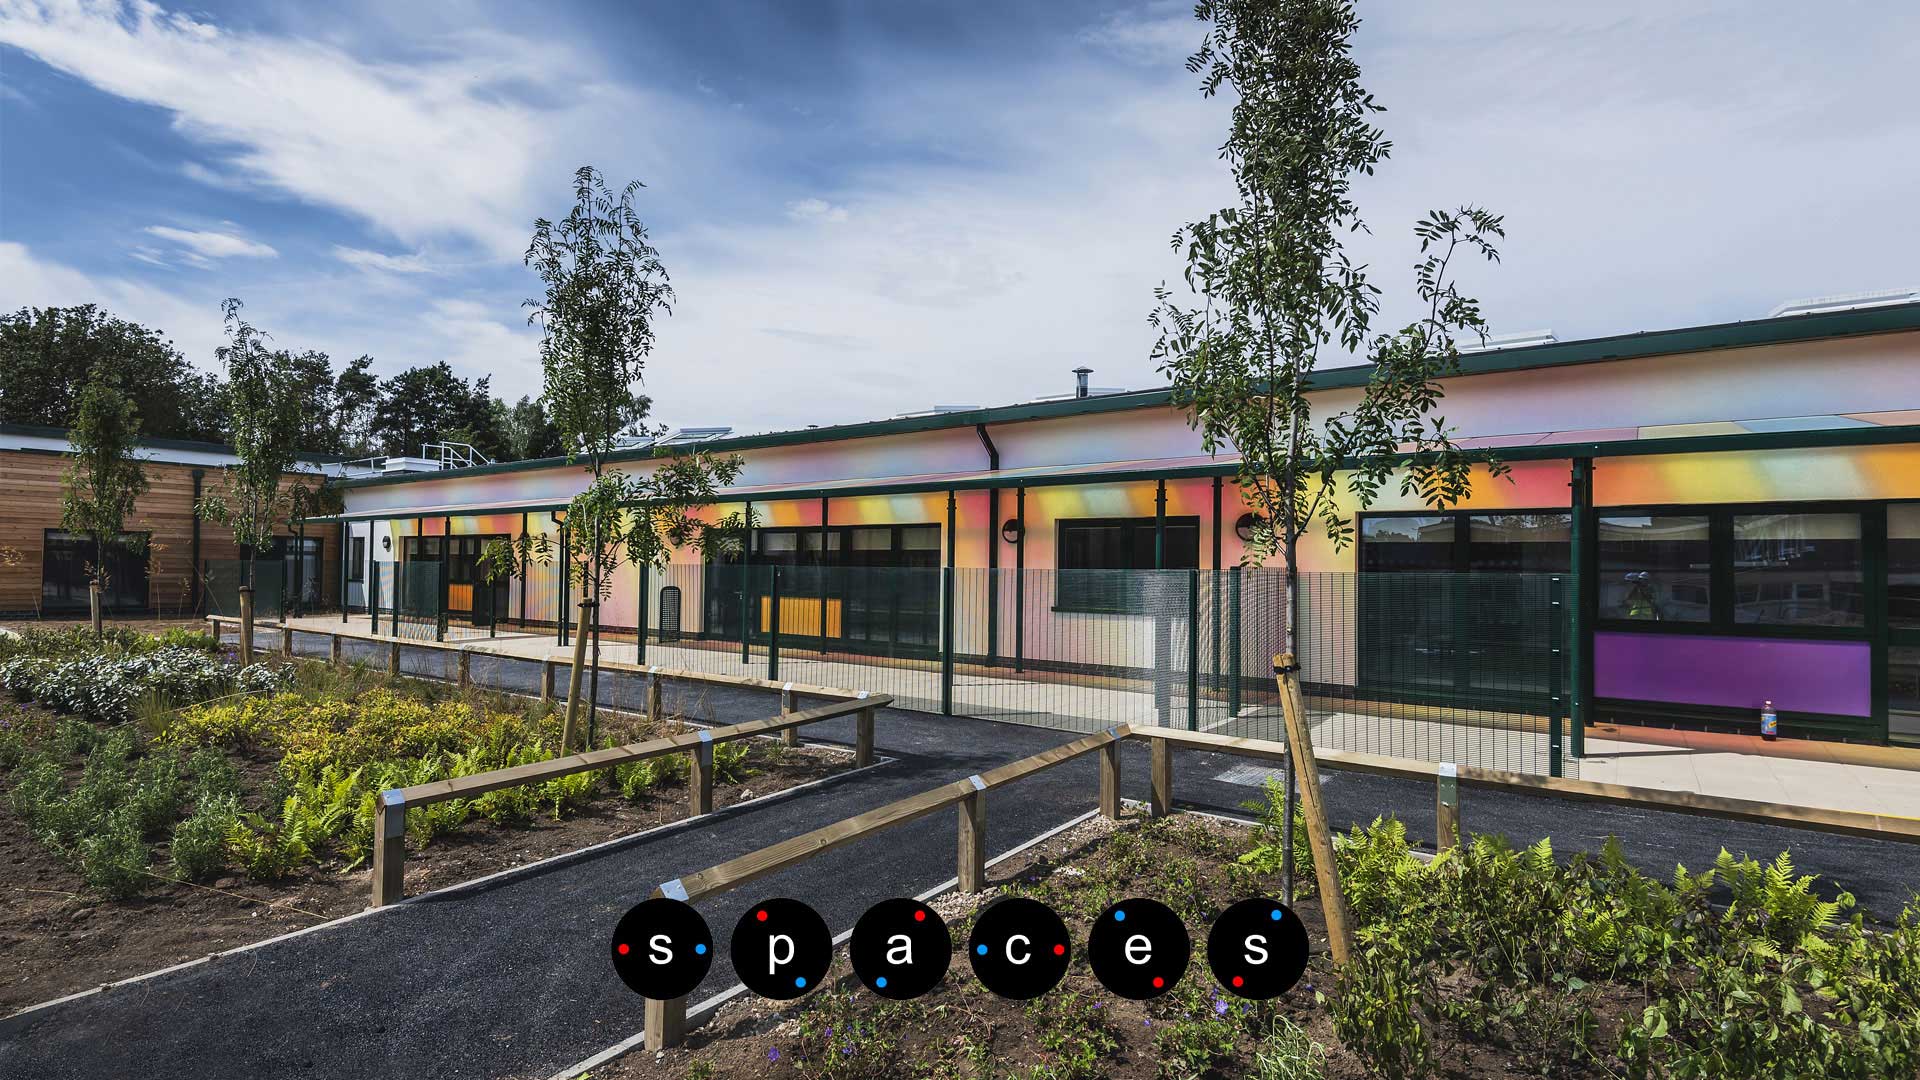 Last week, we received the excellent news that The Bridge School was successful in being shortlisted for the upcoming SPACES yearbook.